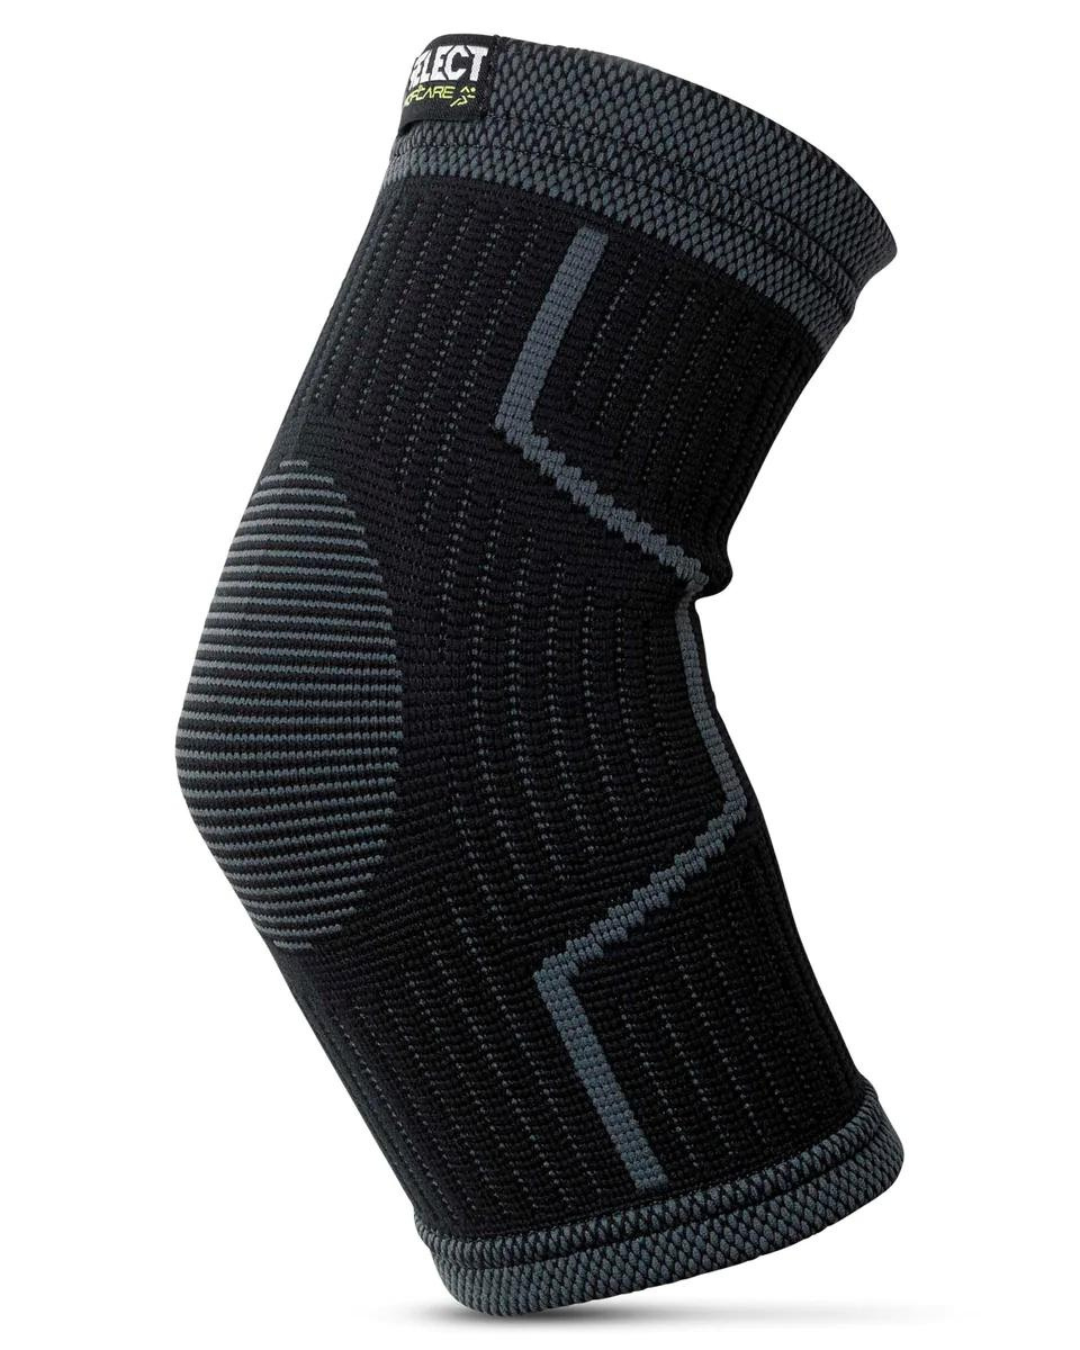 Select Profcare Elastic Elbow Support